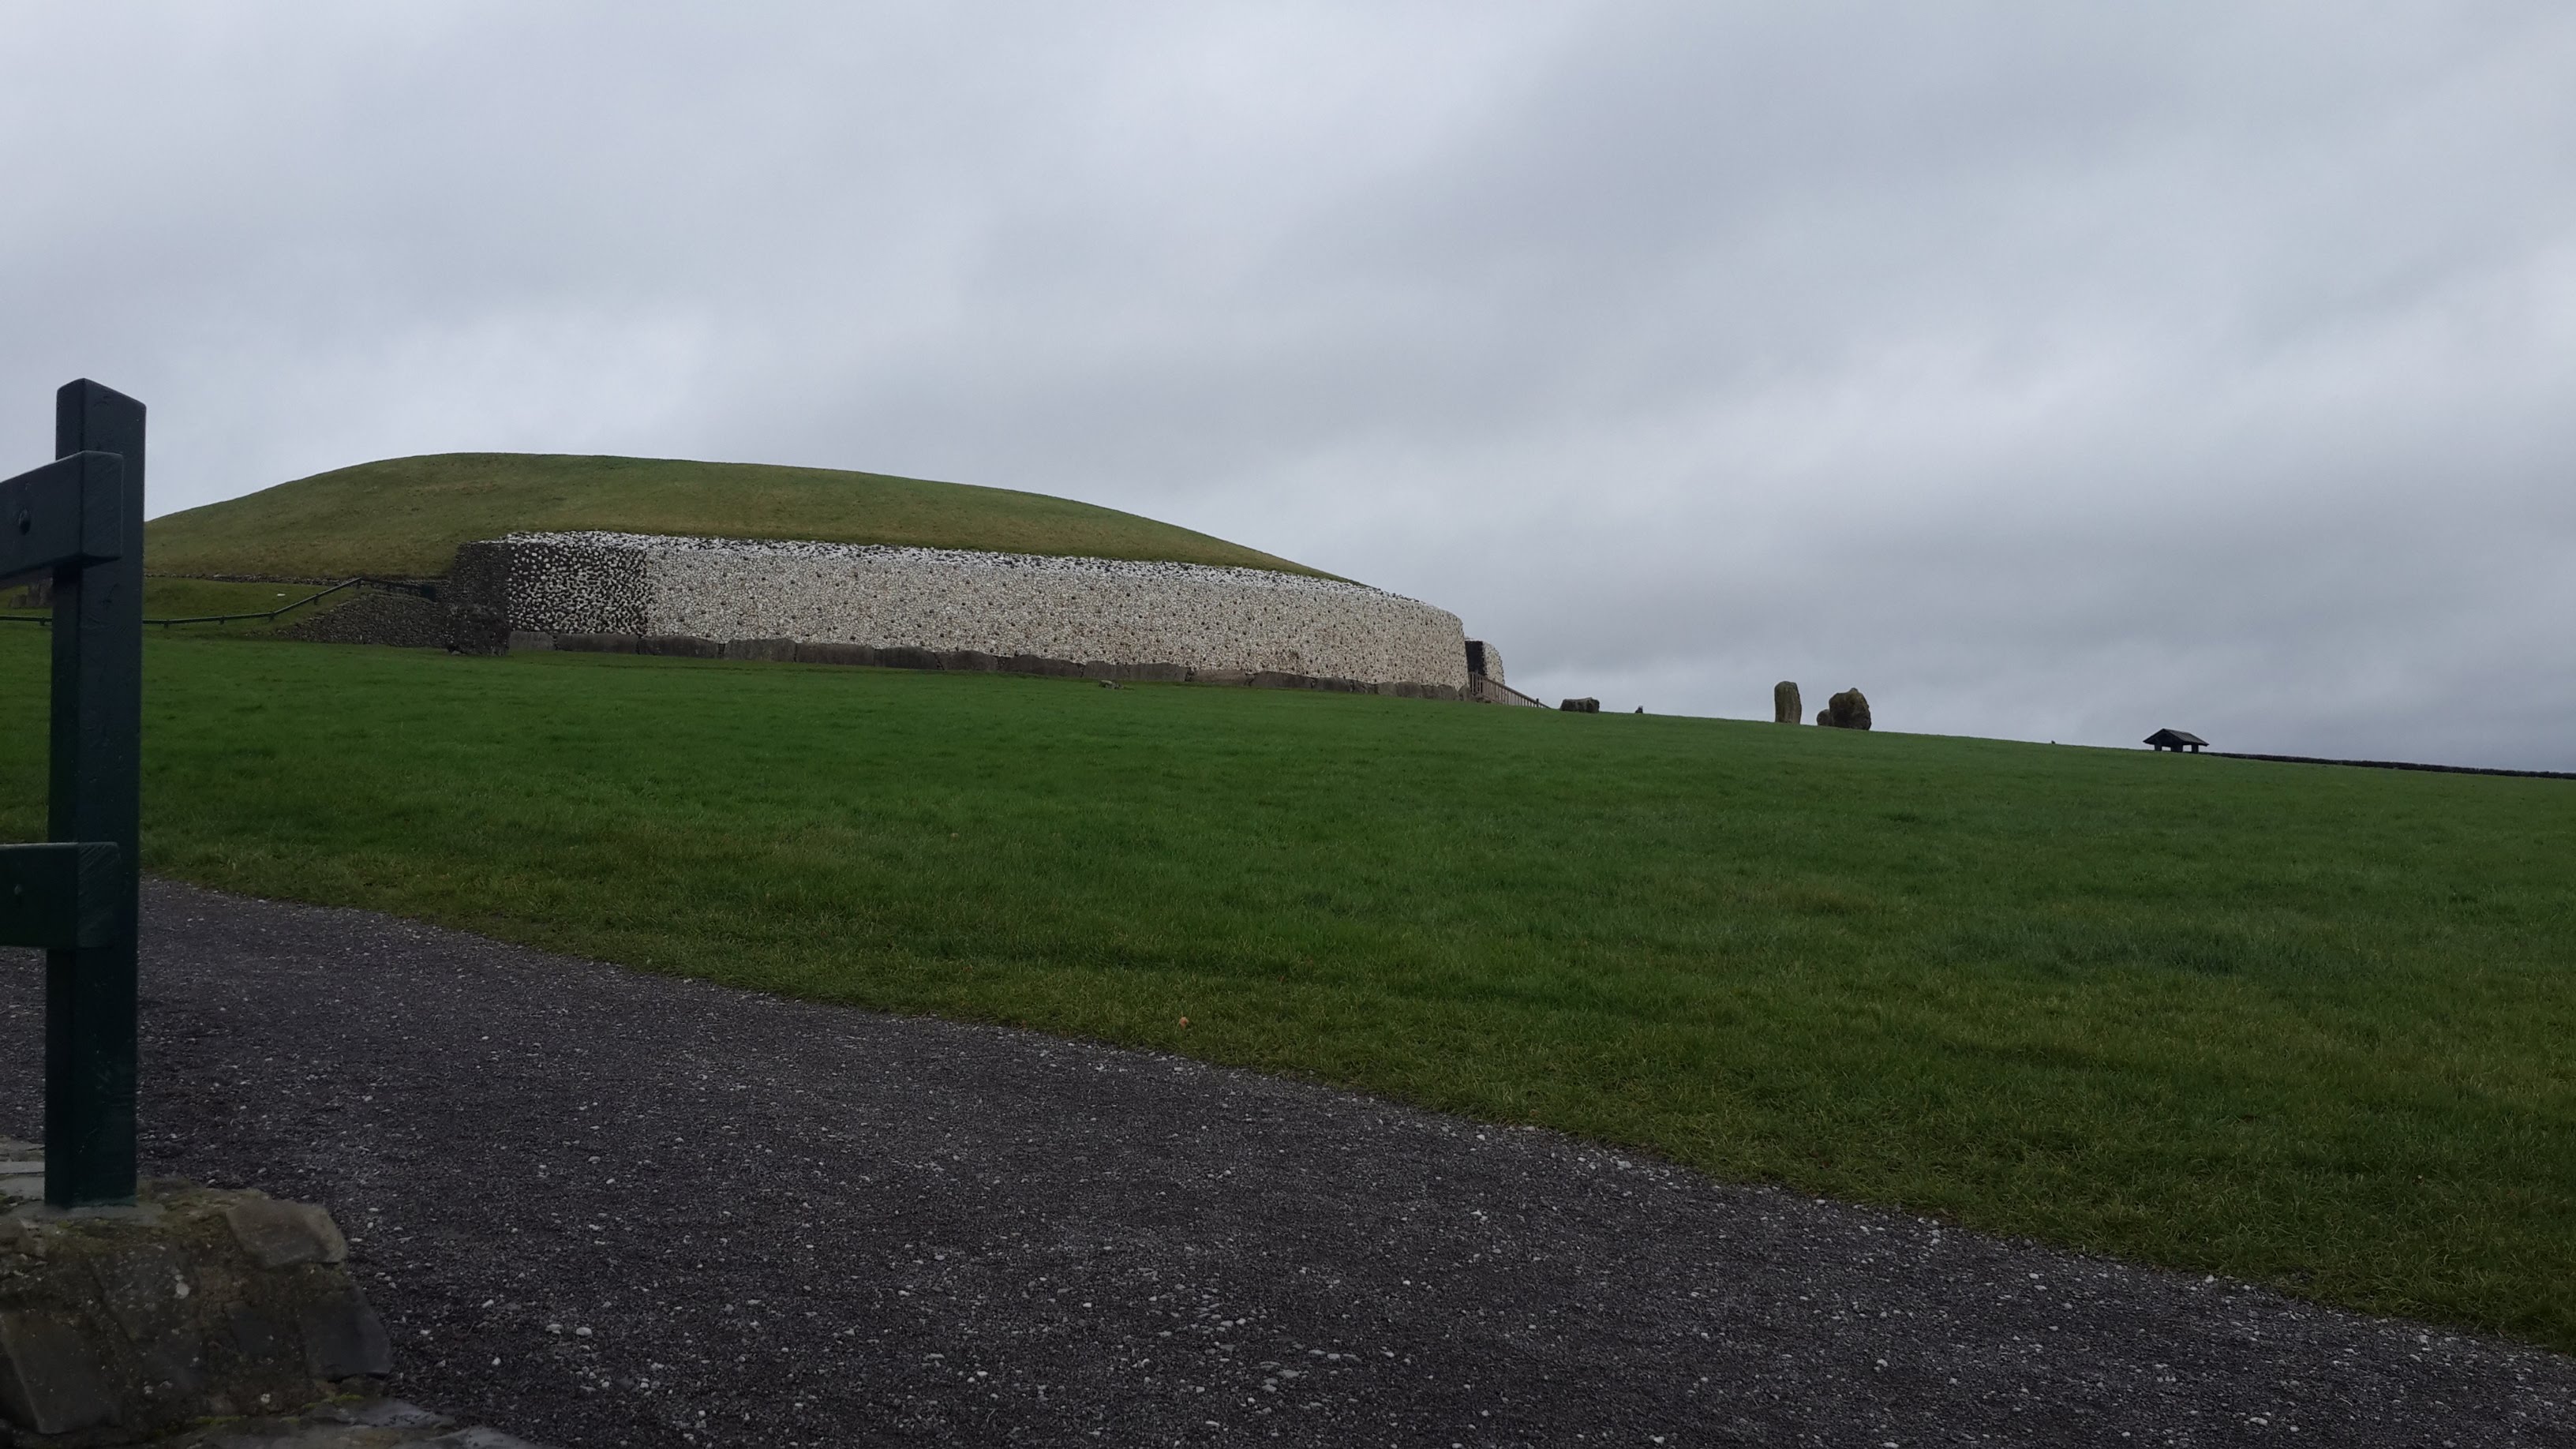 The Tomb of newgrange viewed from the bottom of the hill it was built on. It is a cloudy day, and the grass is particularly green against the contrast of the white stone of Newgrange.